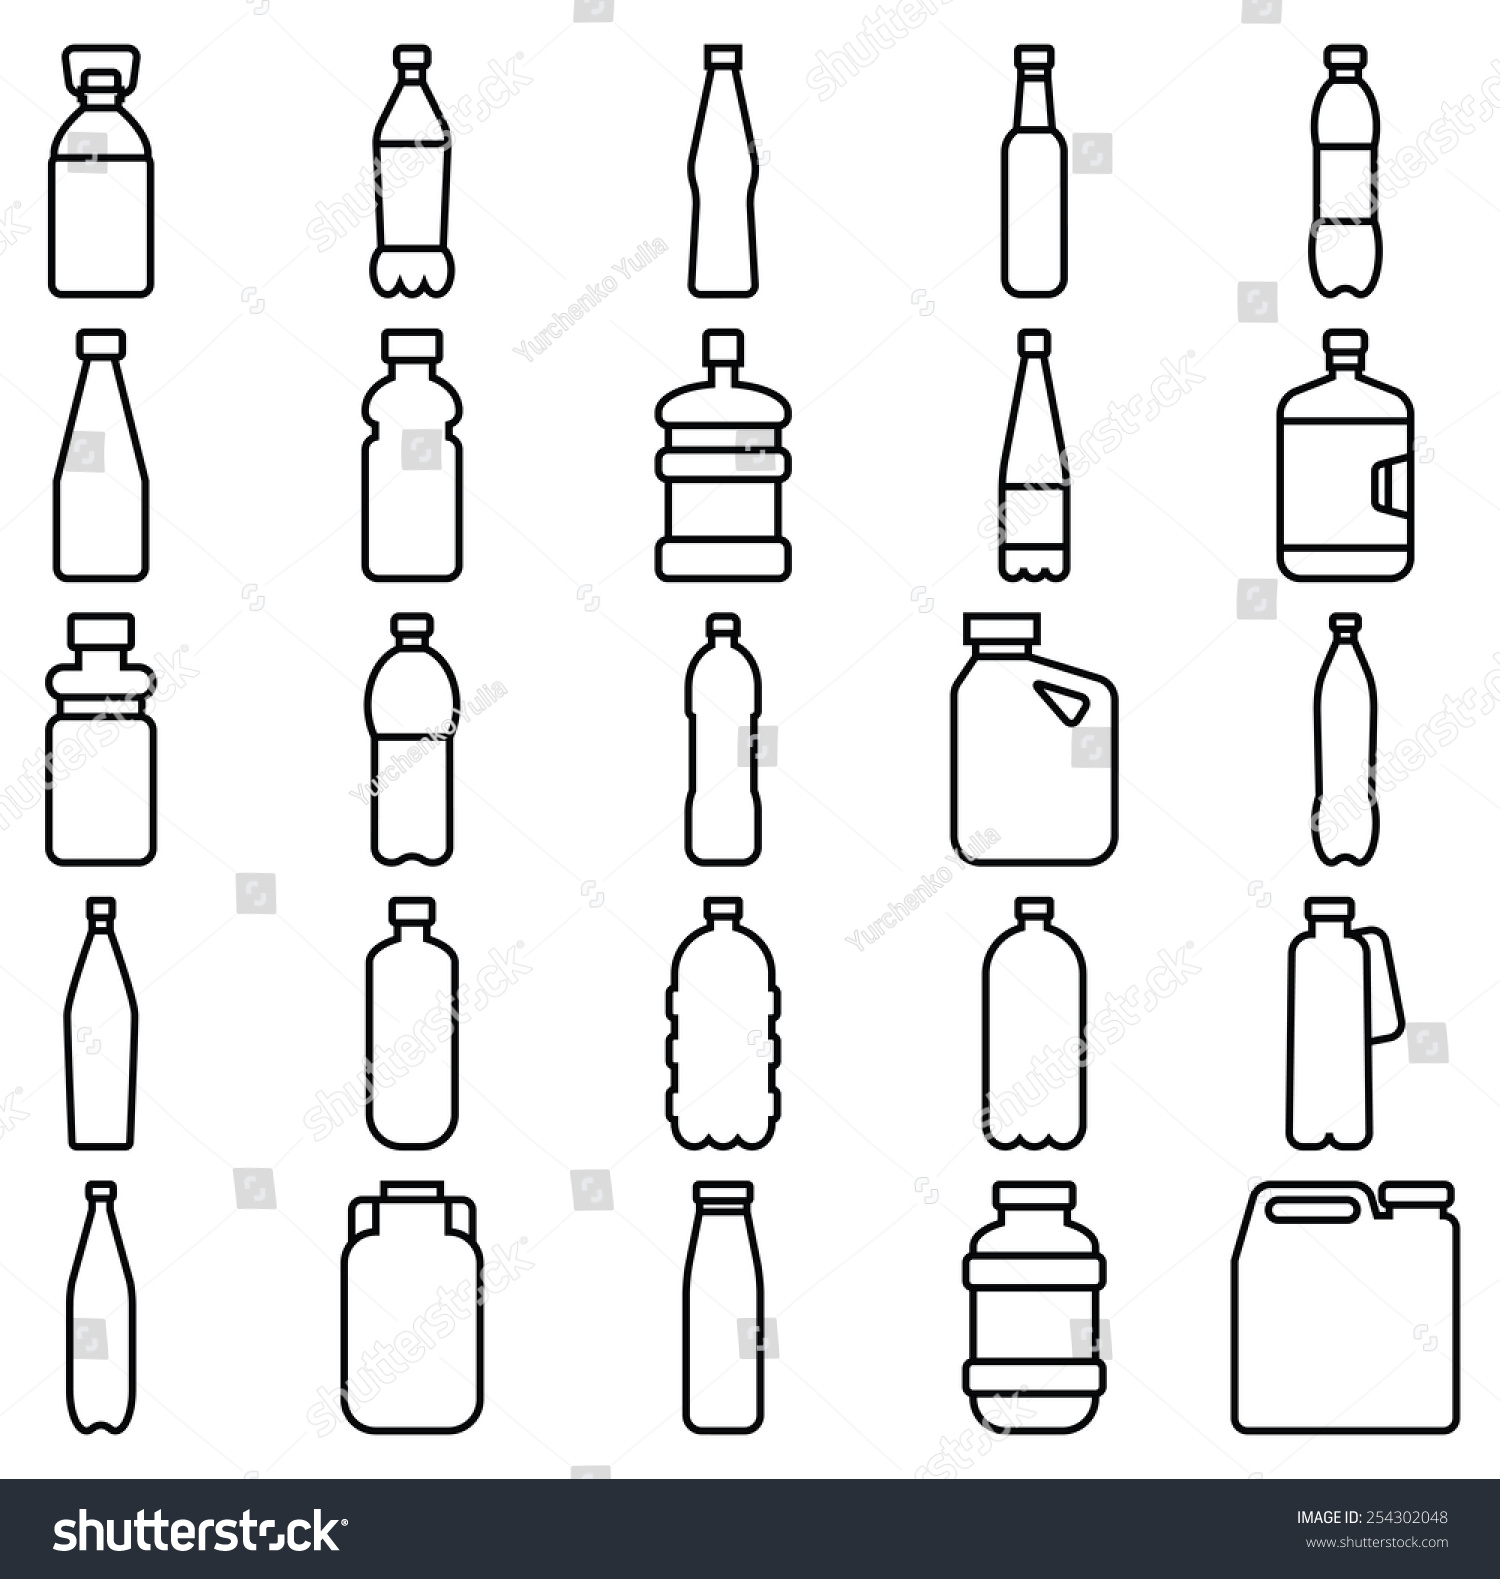 SVG of Stock vector illustration of a set of plastic bottles and other containers/Set of plastic bottles and other containers/Stock vector illustration svg